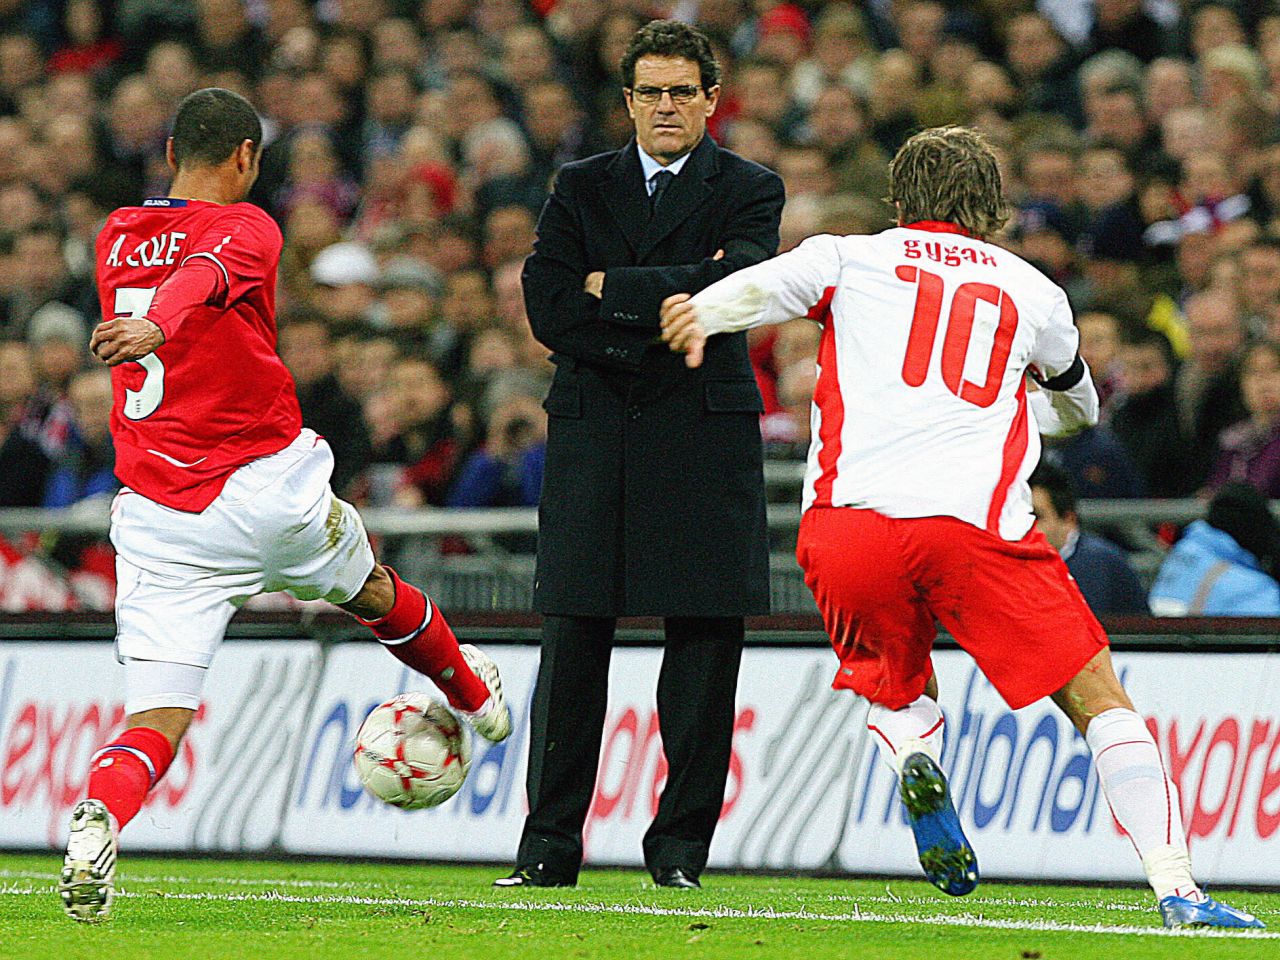 The Italian's first game in charge was a friendly international against Switzerland at Wembley in February 2008, with England winning 2-1.